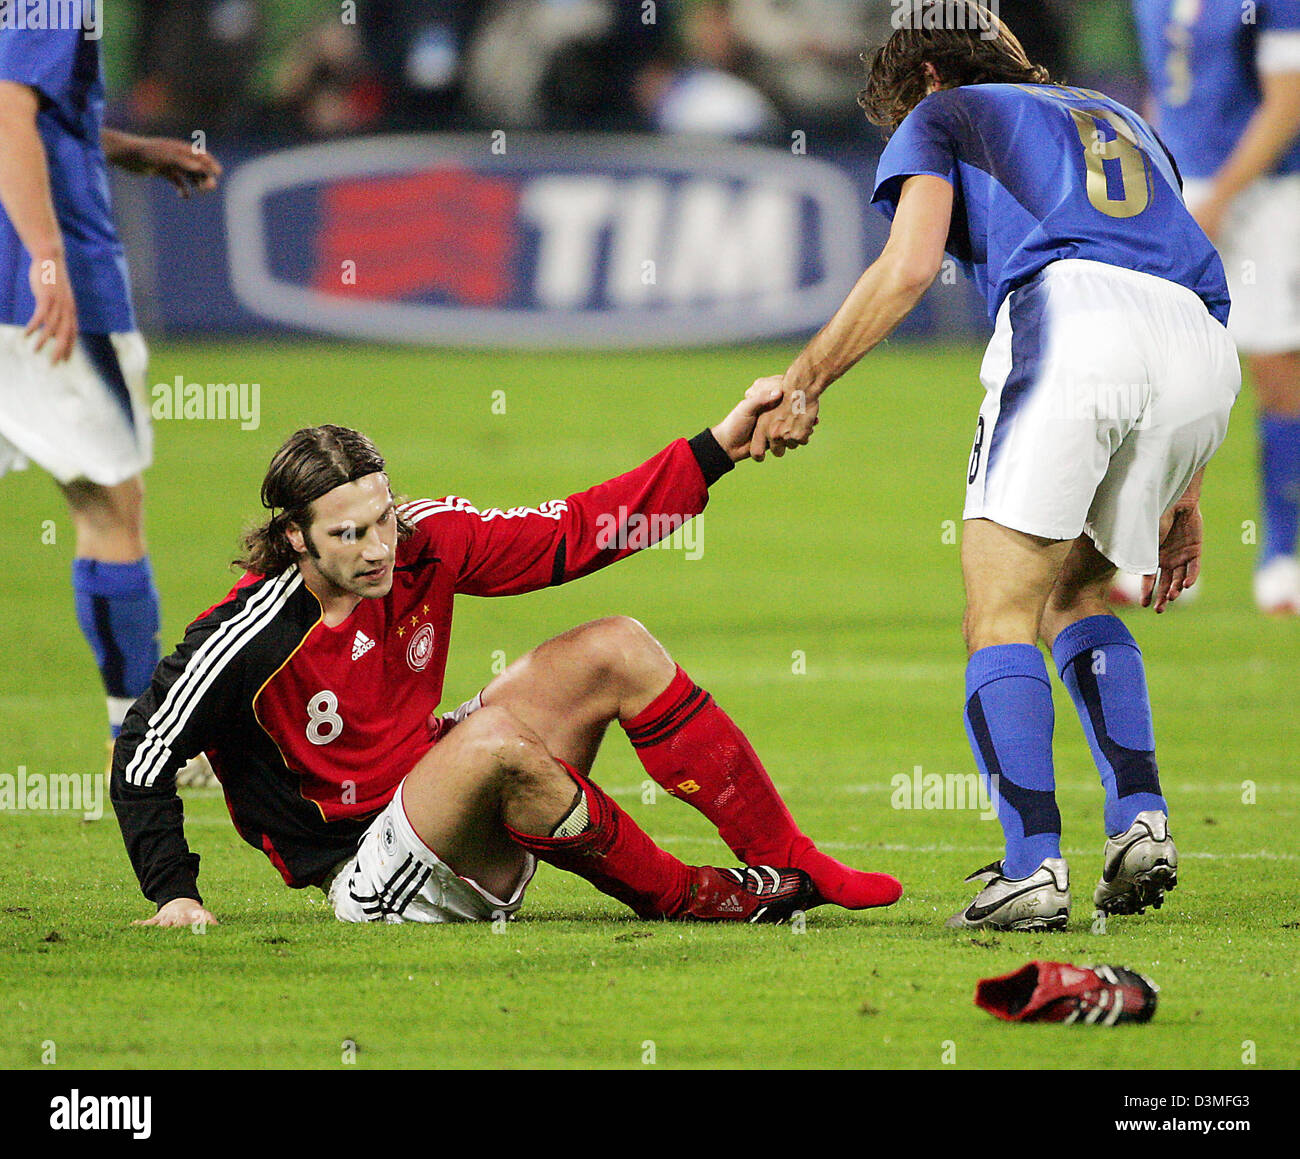 Italy's Andrea Pirlo (R) helps German national soccer player Torsten Frings back on his feet during the international friendly in Florence, Italy, Wednesday, 01 March 2006. Italy thumped World Cup hosts Germany 4-1 in a surprisingly one-sided match. Two goals in the first seven minutes from Gilardino and Toni put the Italians in control. De Rossi's header made it three and Del Pier Stock Photo